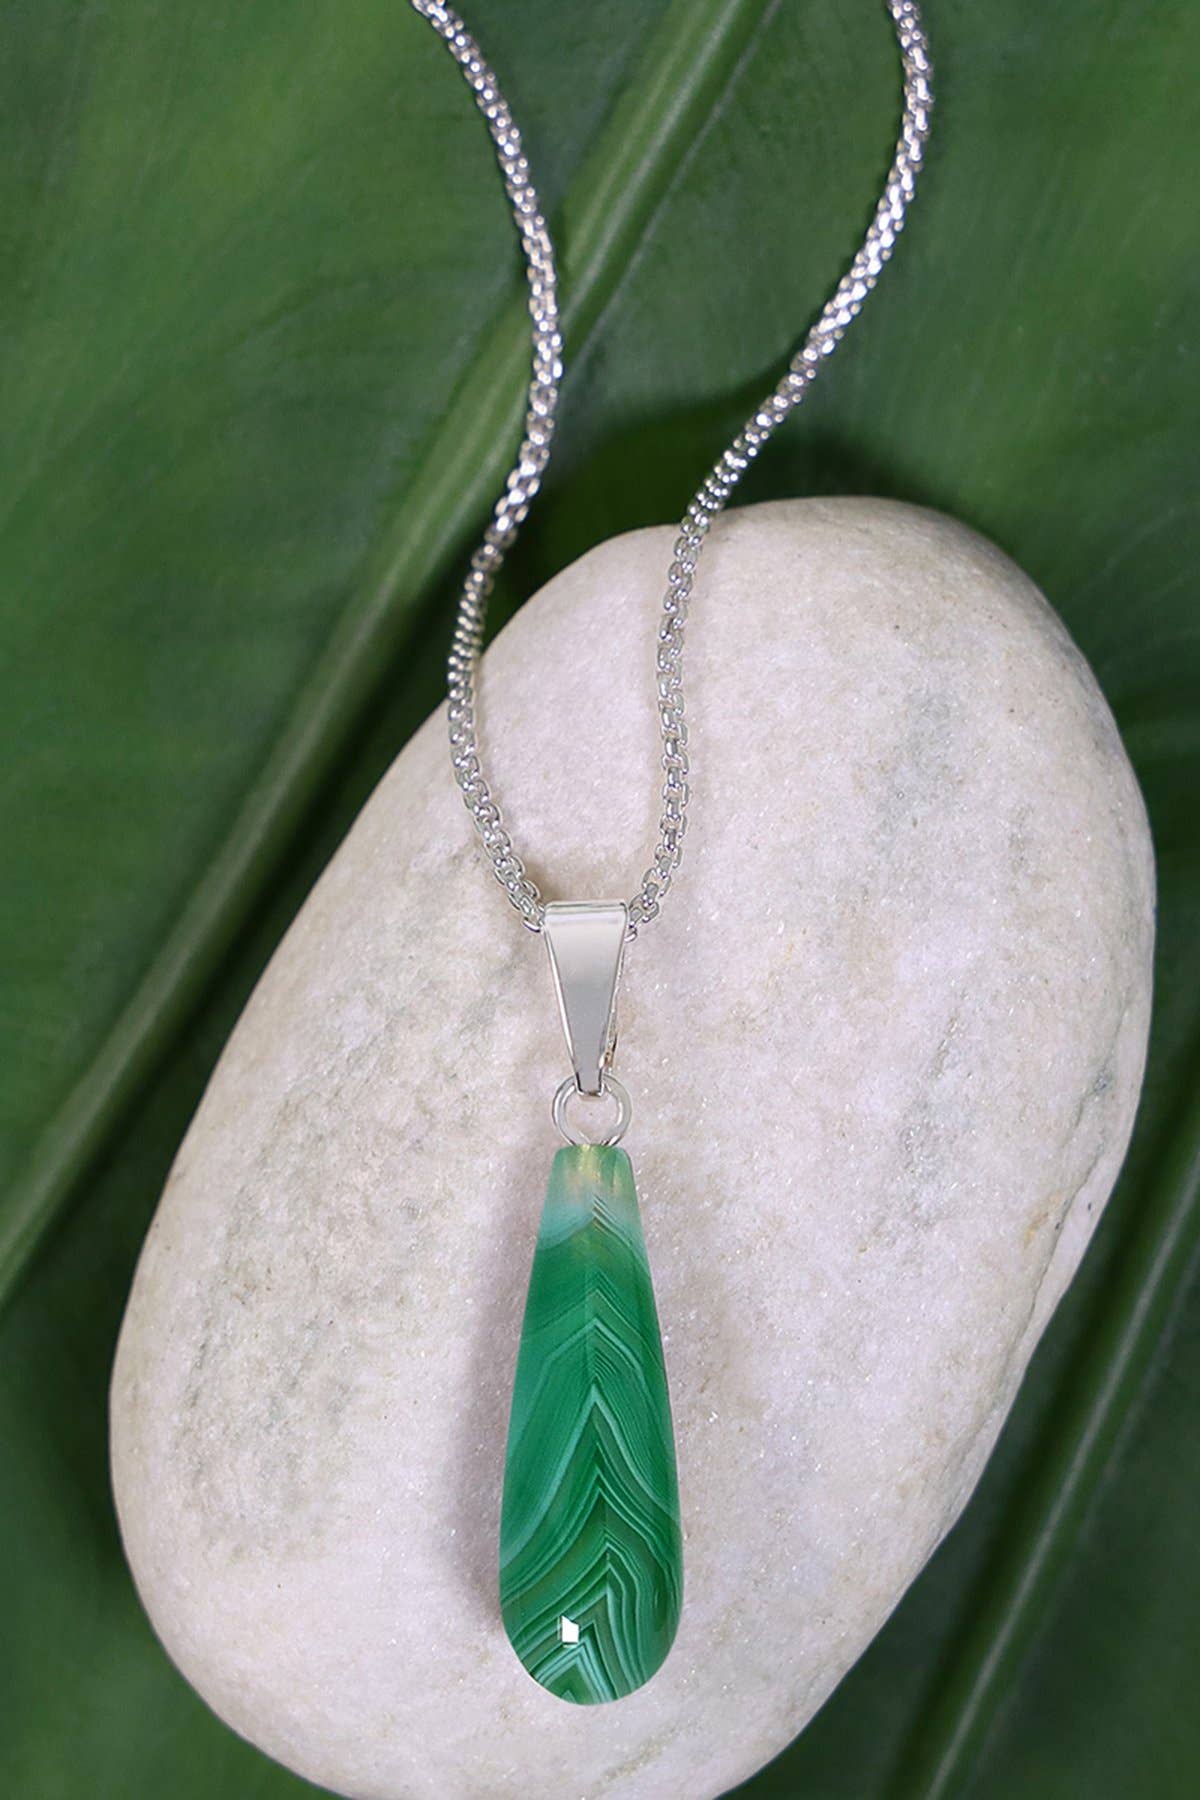 Sterling Silver & Green Lace Agate Teardrop Necklace - SS